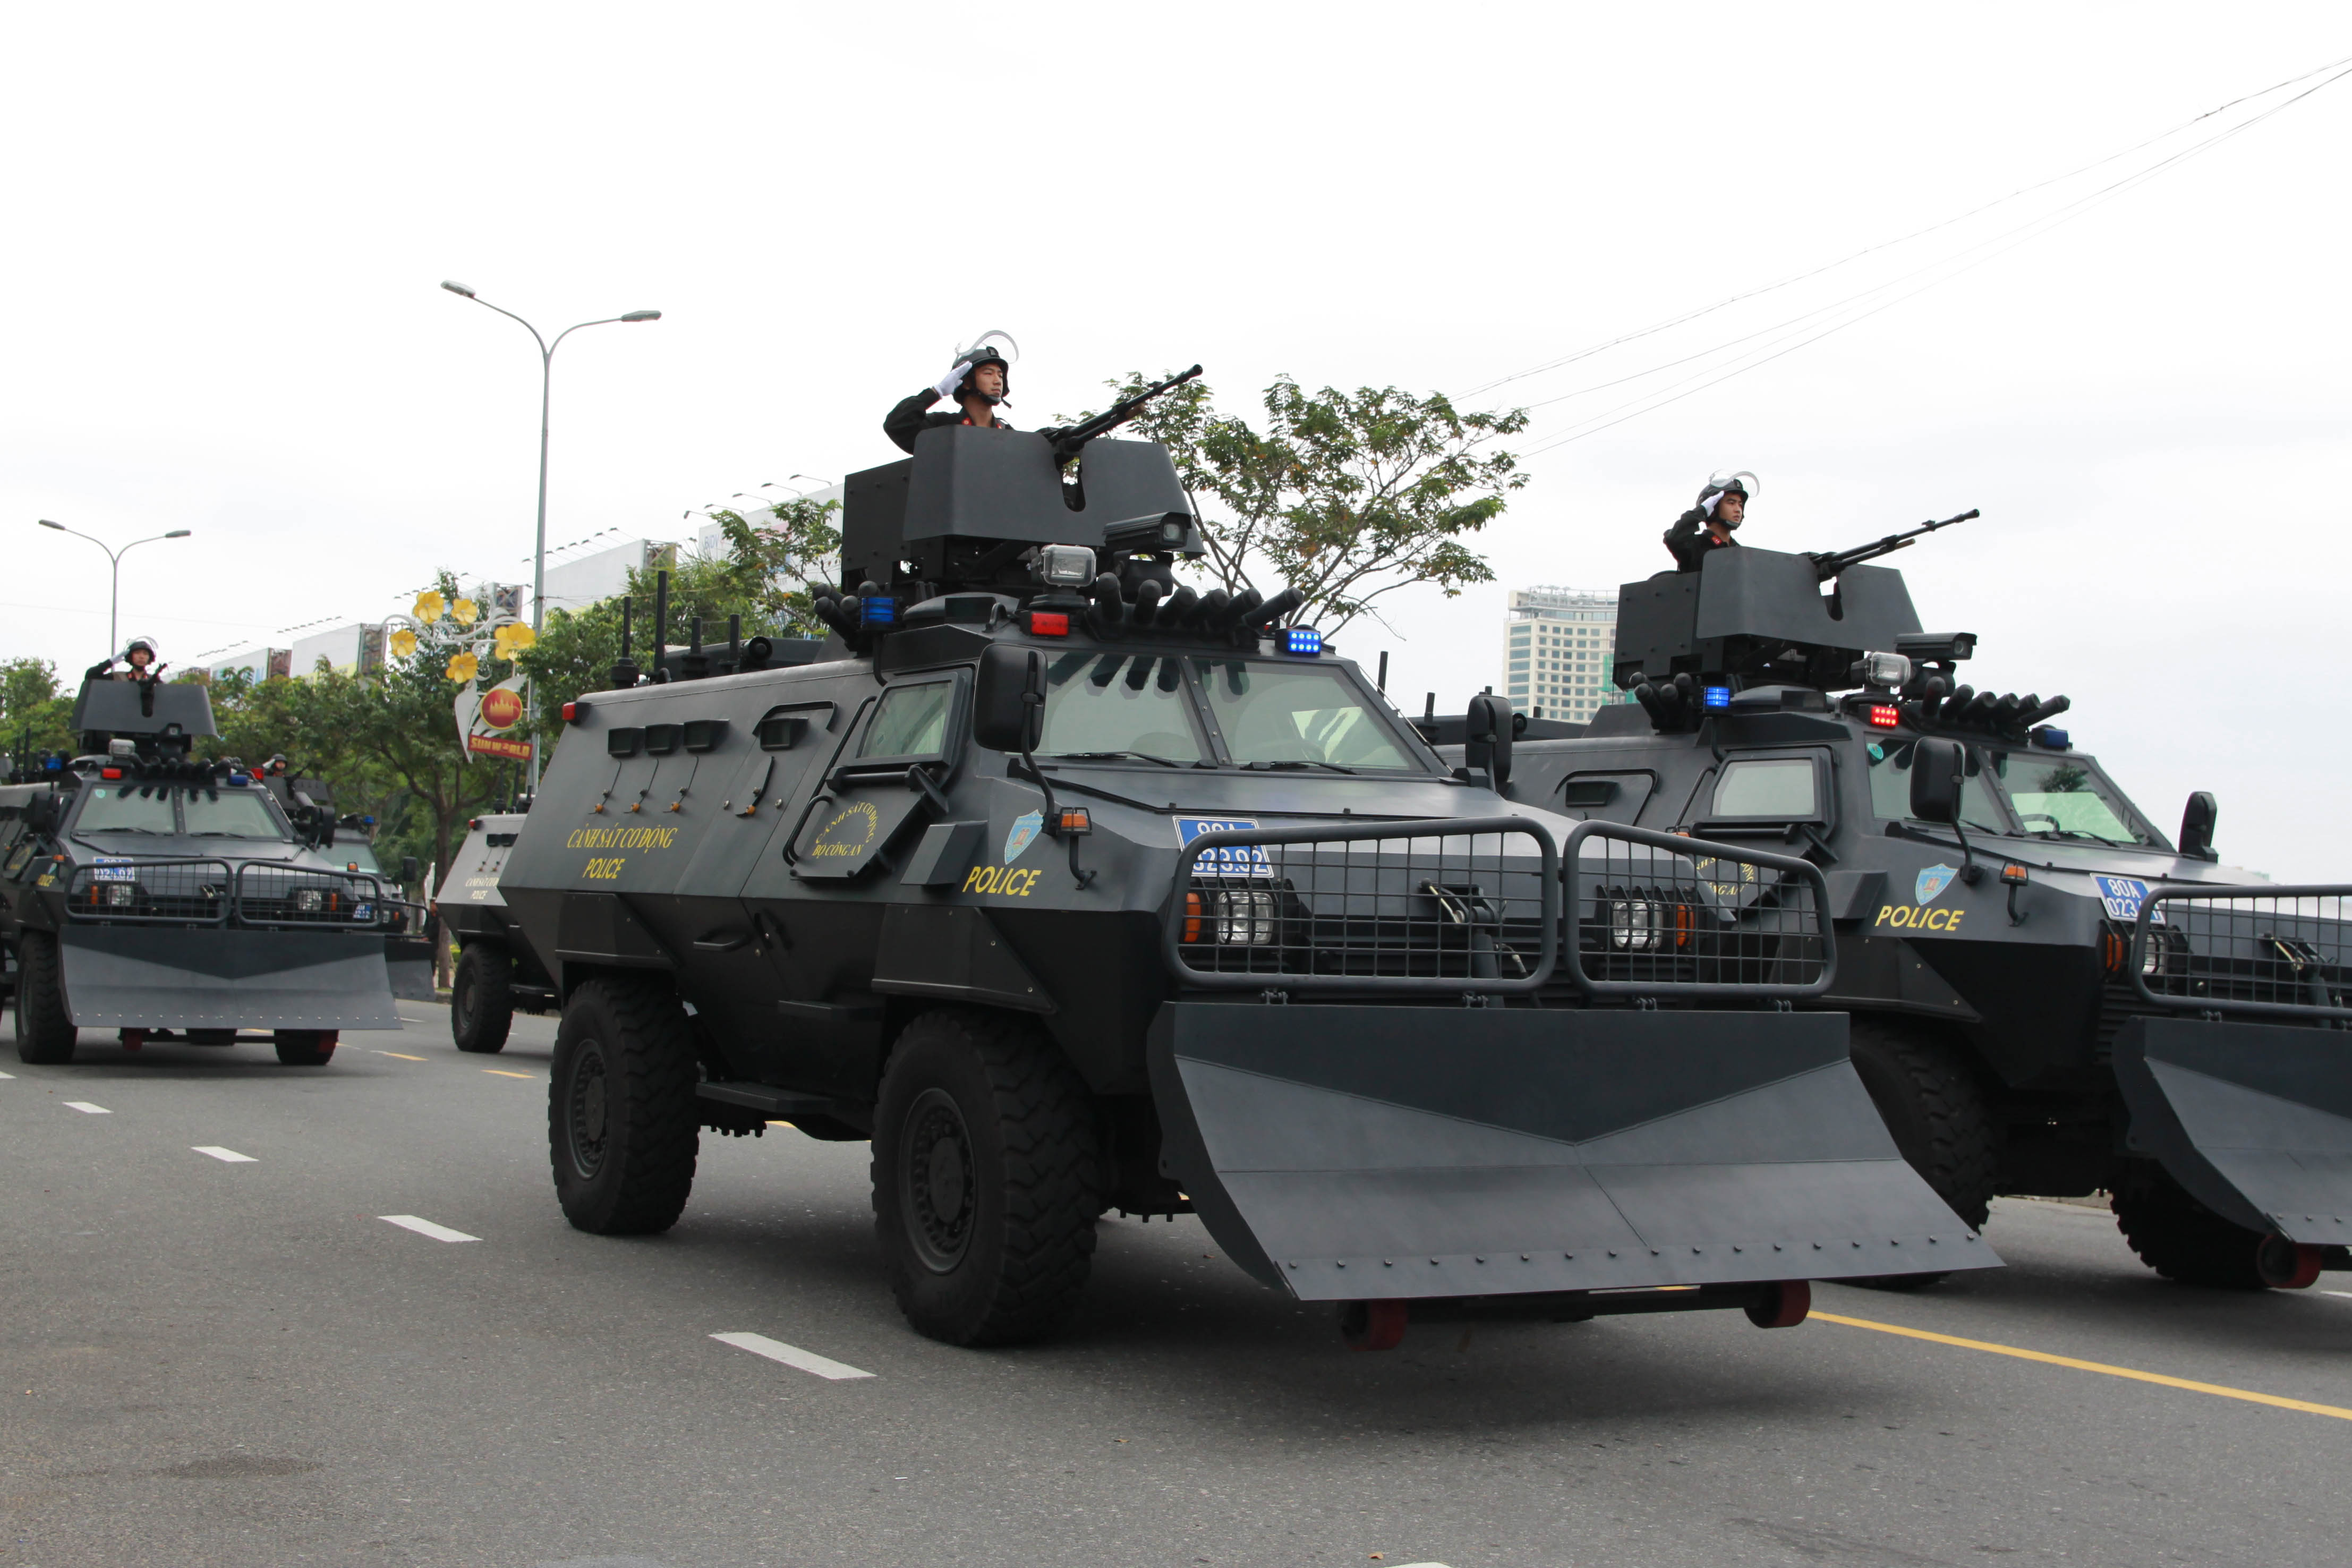 Special armored vehicles from the Ministry of Public Security